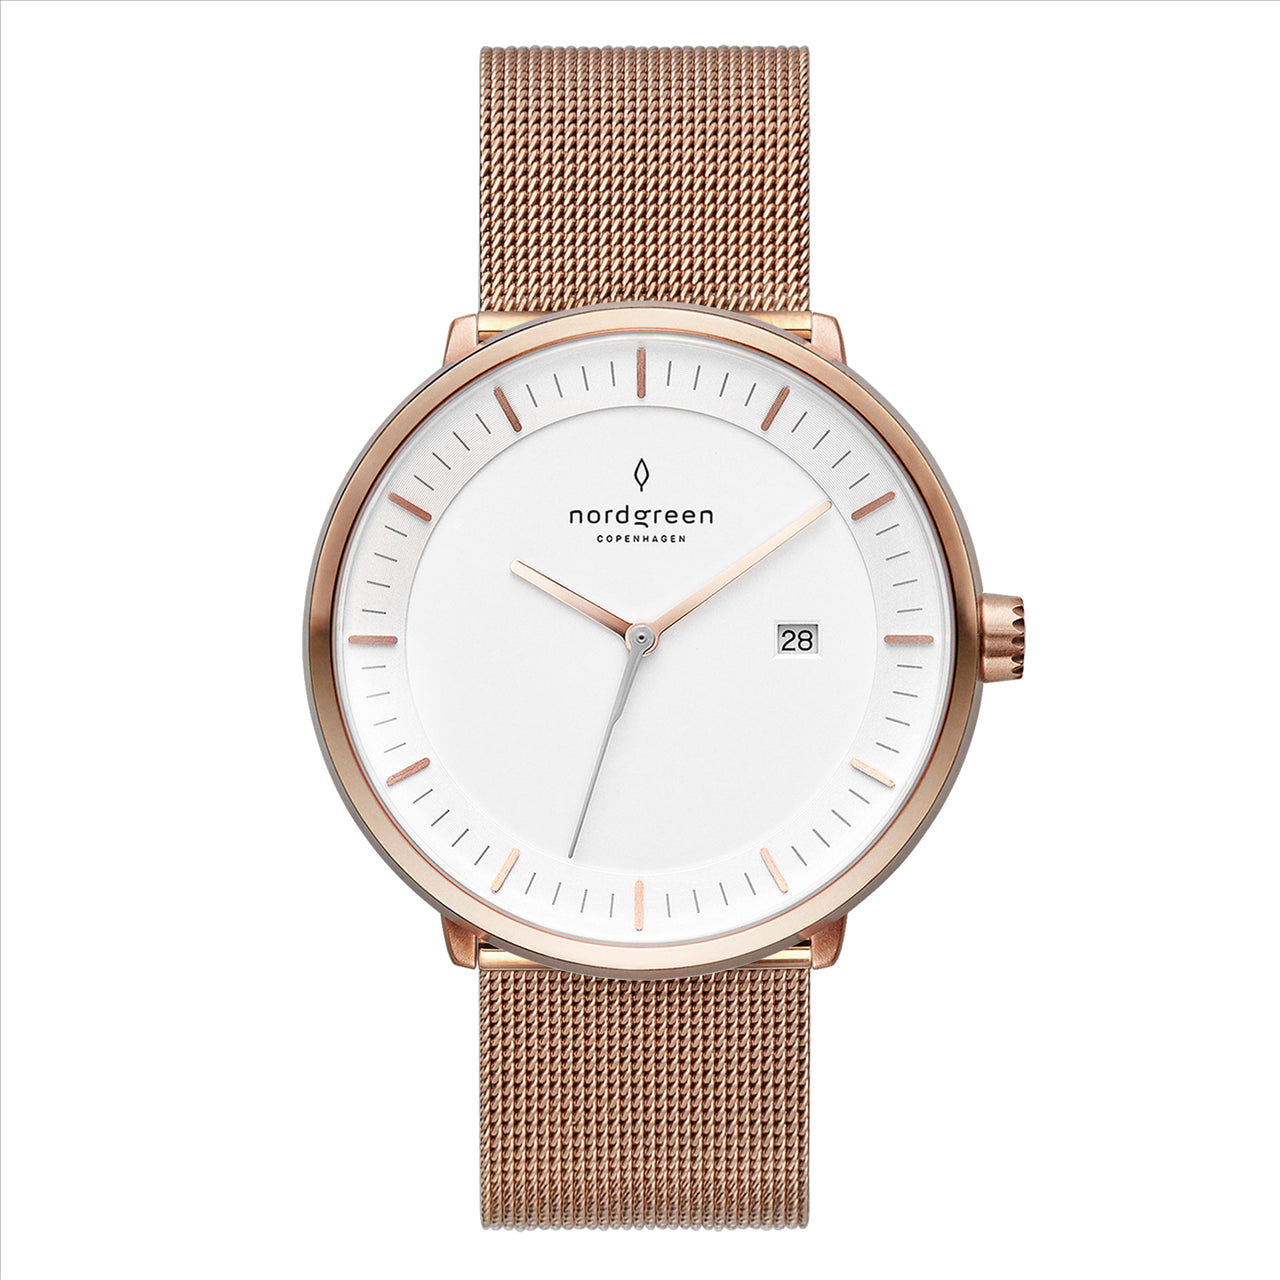 Nordgreen philosopher womens dress watch white dial rose gold mesh band rose gold case 36